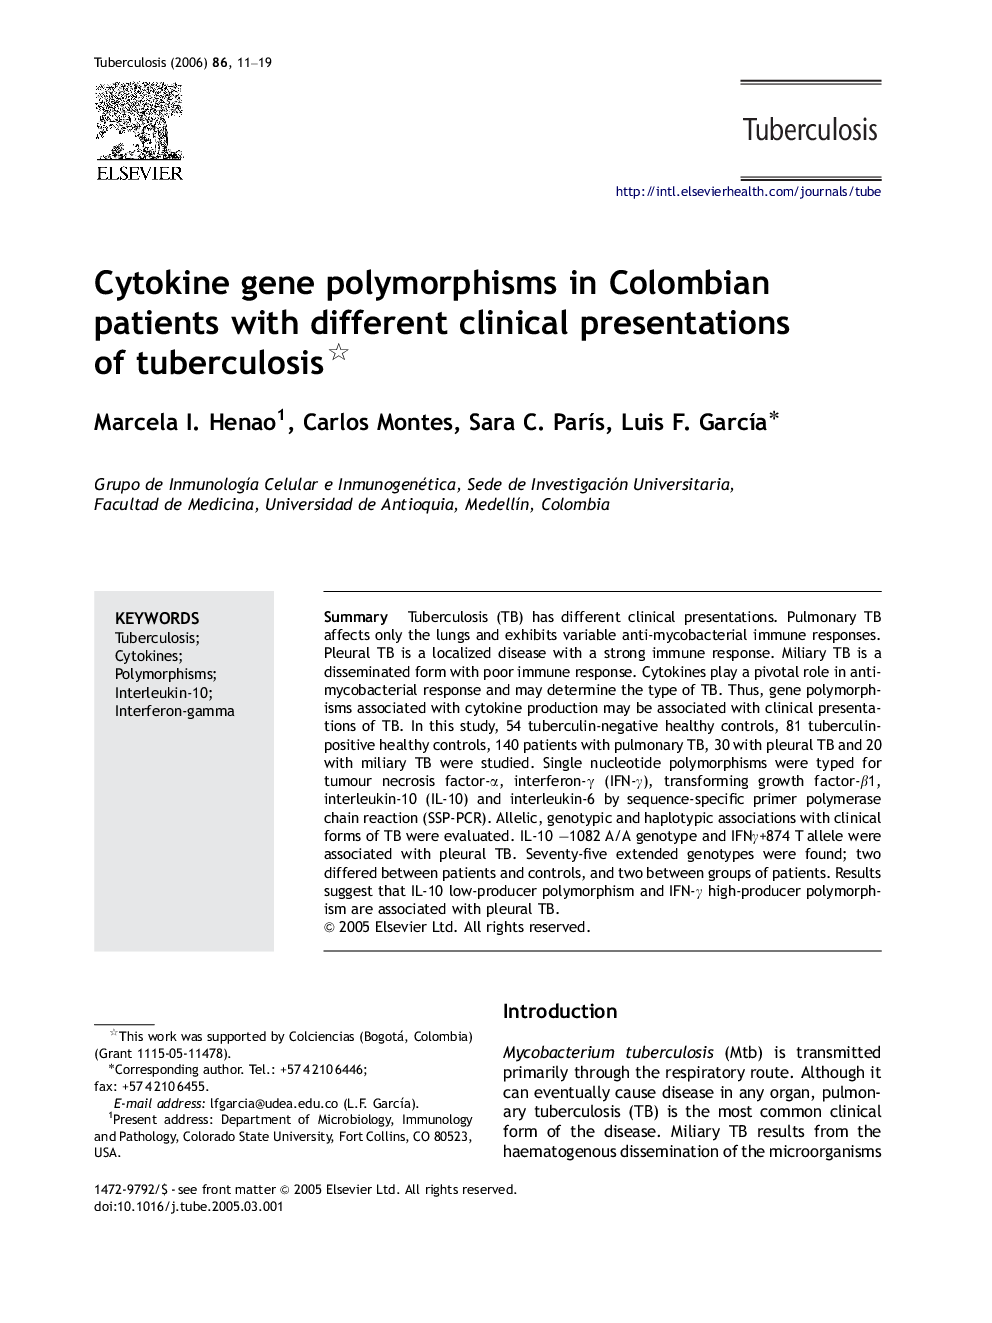 Cytokine gene polymorphisms in Colombian patients with different clinical presentations of tuberculosis 